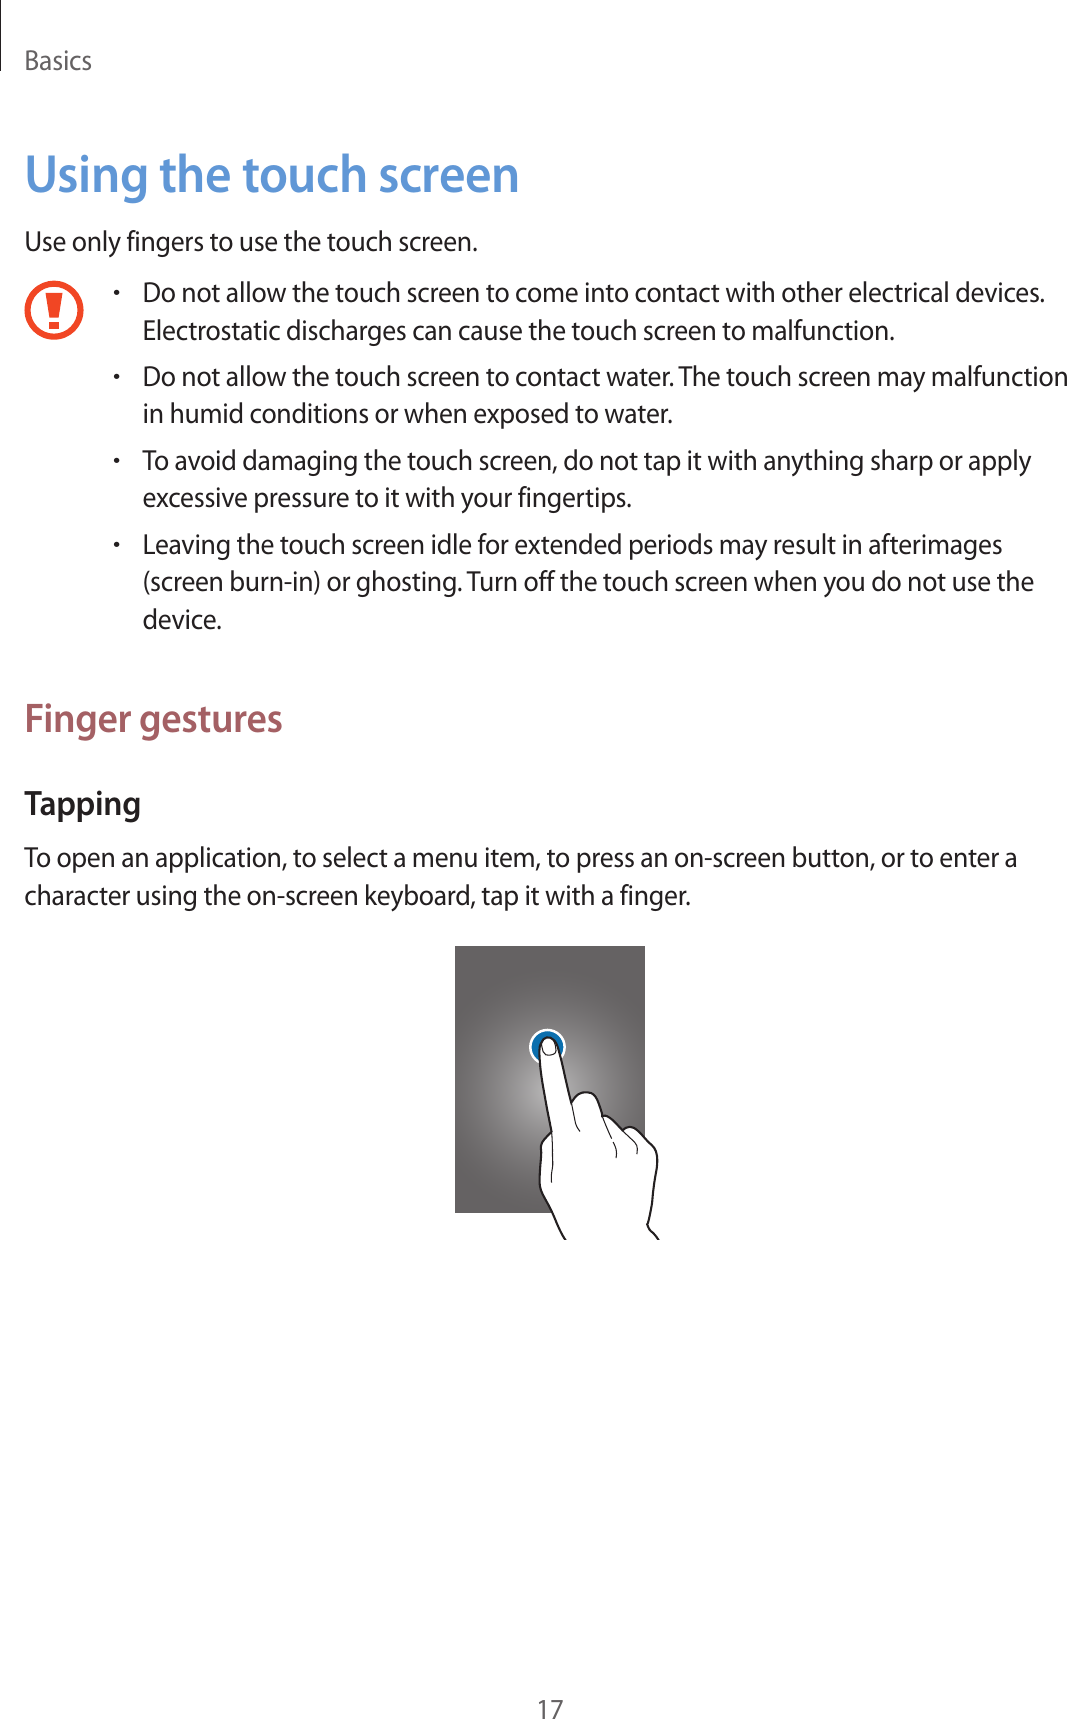 Basics17Using the touch screenUse only fingers to use the touch screen.•Do not allow the touch screen to come into contact with other electrical devices. Electrostatic discharges can cause the touch screen to malfunction.•Do not allow the touch screen to contact water. The touch screen may malfunction in humid conditions or when exposed to water.•To avoid damaging the touch screen, do not tap it with anything sharp or apply excessive pressure to it with your fingertips.•Leaving the touch screen idle for extended periods may result in afterimages (screen burn-in) or ghosting. Turn off the touch screen when you do not use the device.Finger gesturesTappingTo open an application, to select a menu item, to press an on-screen button, or to enter a character using the on-screen keyboard, tap it with a finger.